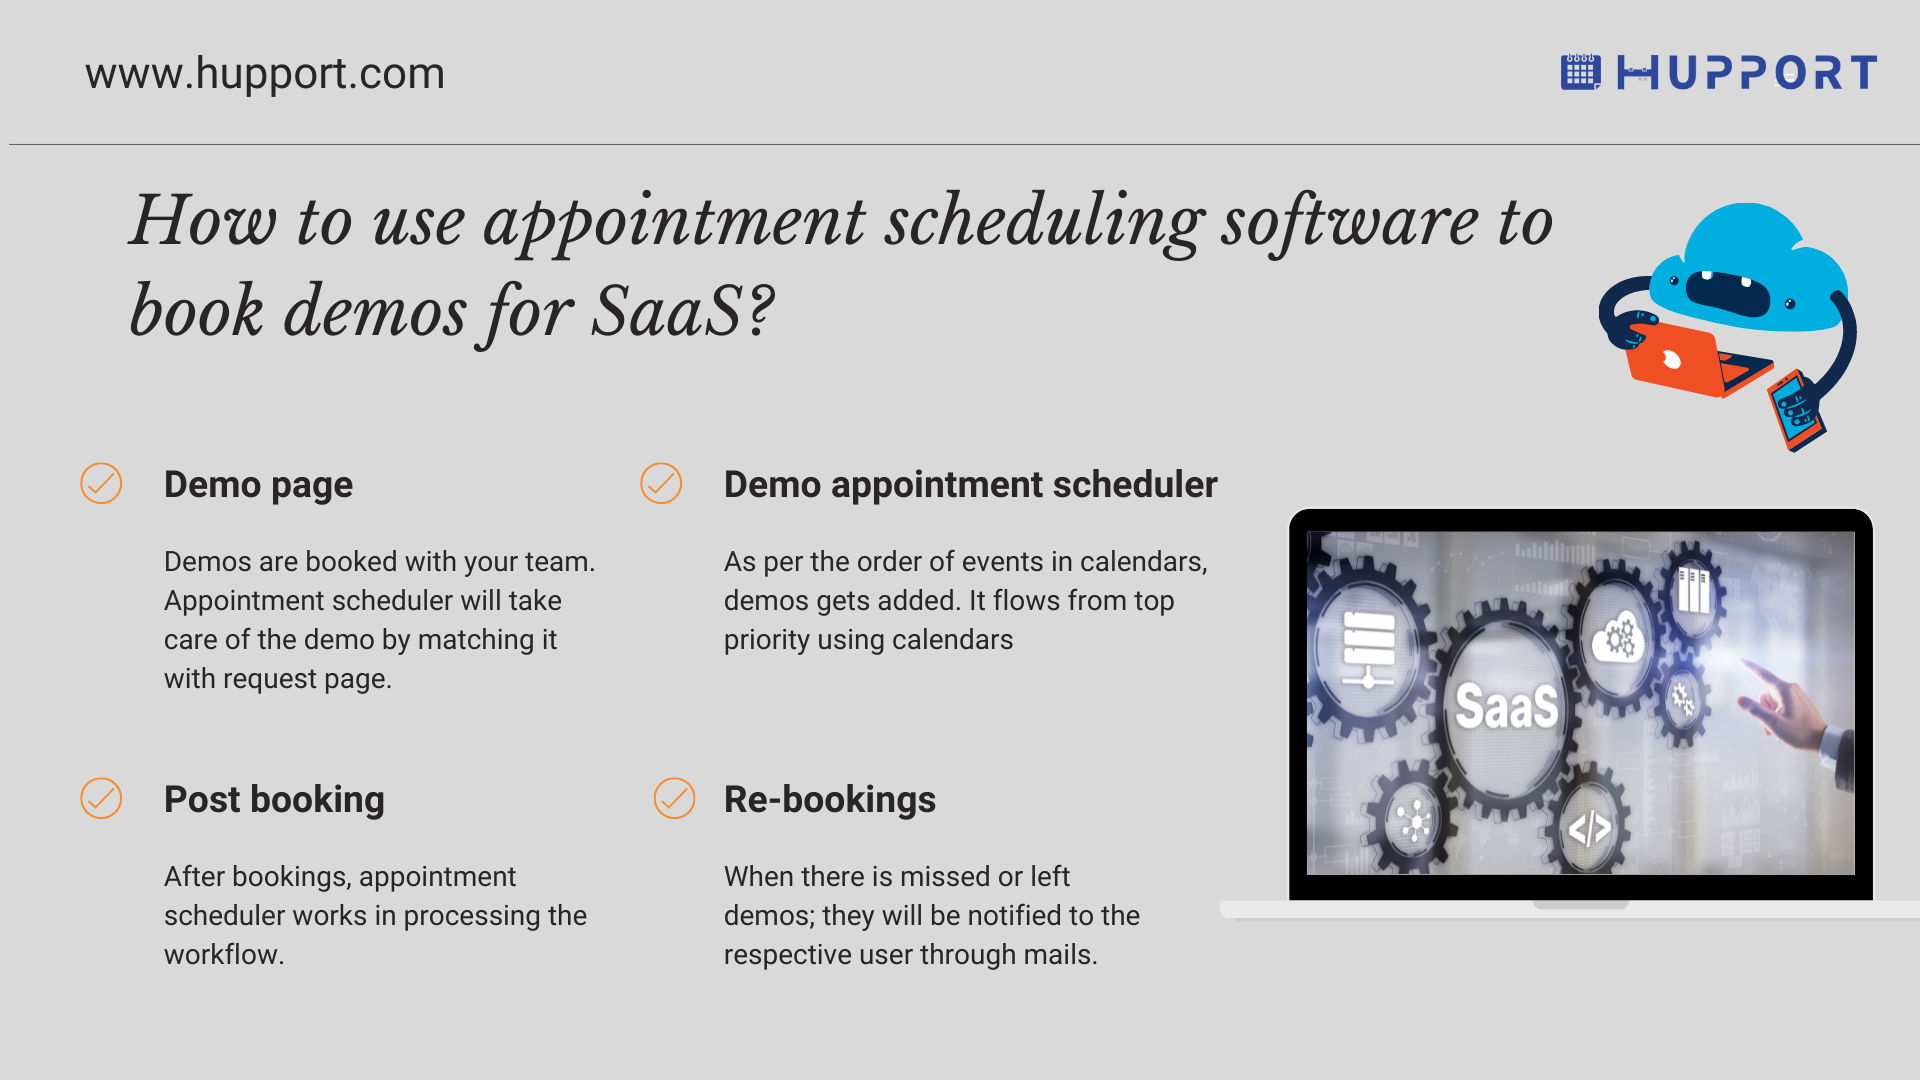 How to use SaaS business management software to book demos for SaaS